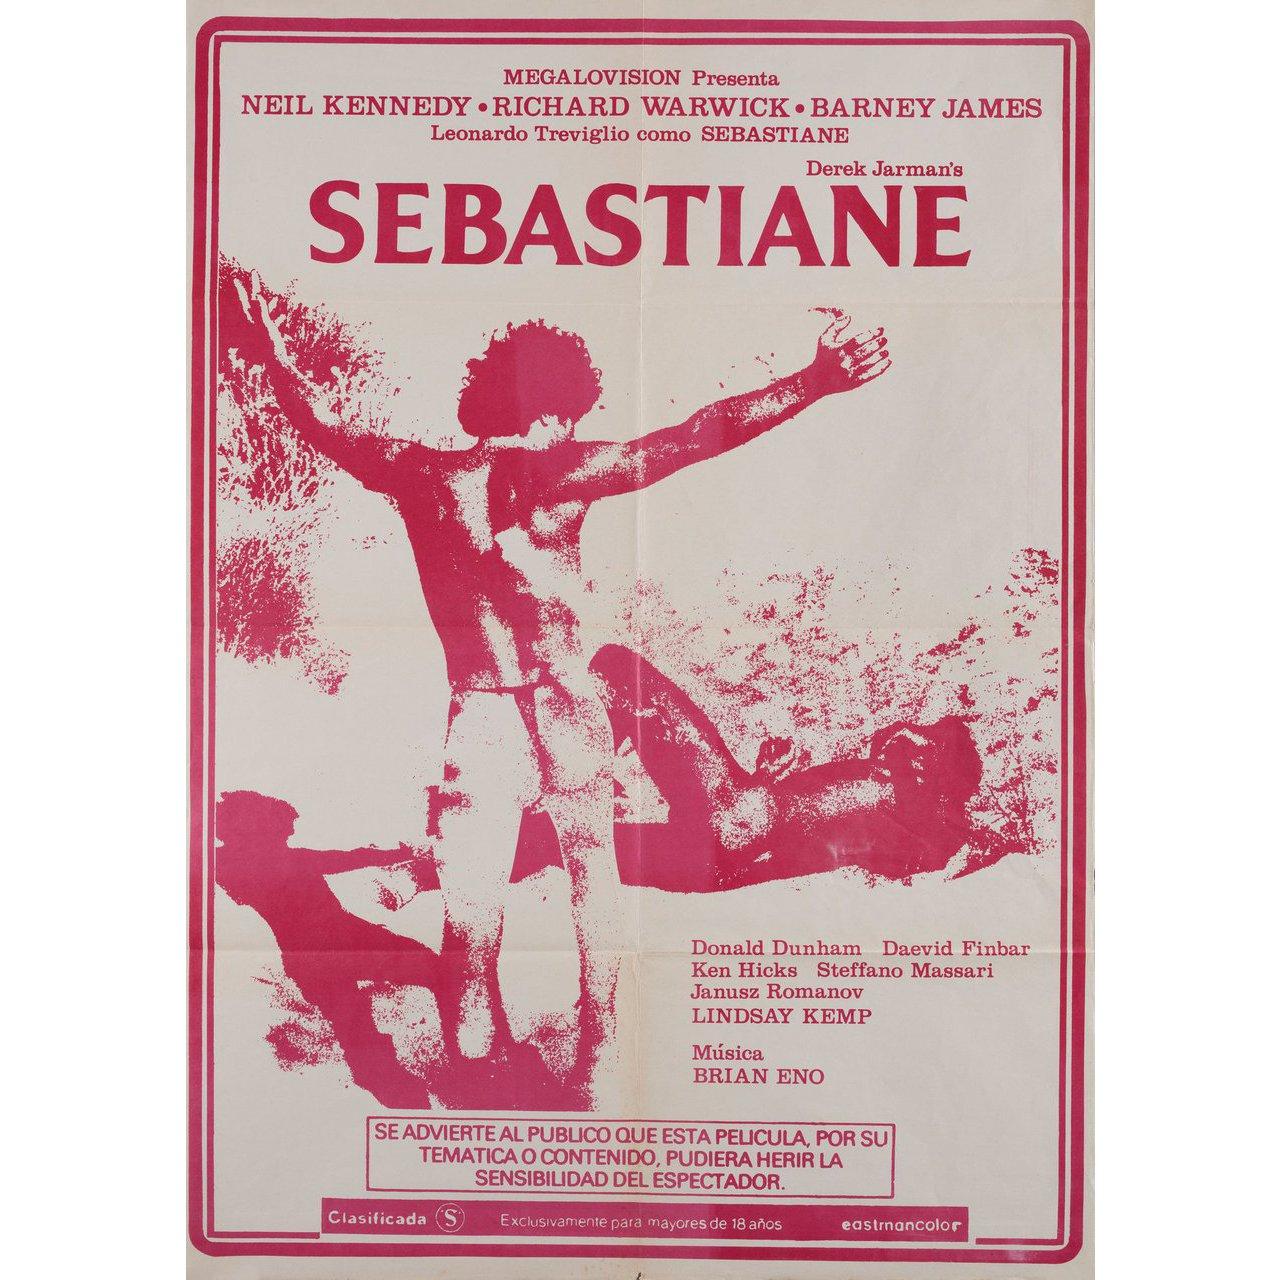 Original 1976 Spanish A1 poster for the film Sebastiane directed by Paul Humfress / Derek Jarman with Barney James / Neil Kennedy / Leonardo Treviglio / Richard Warwick. Very Good-Fine condition, folded. Many original posters were issued folded or